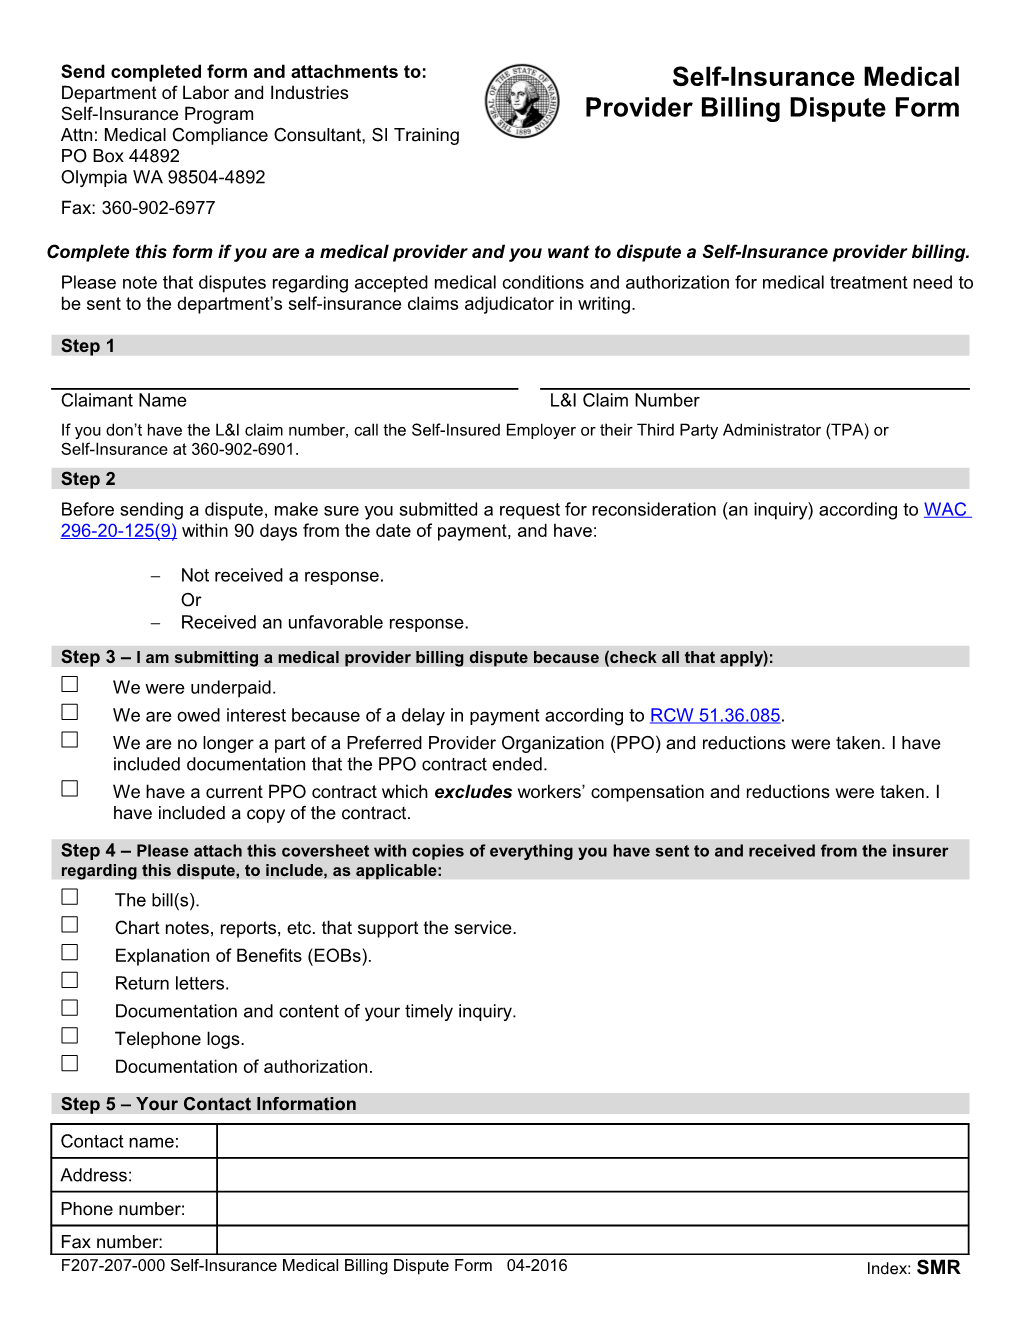 Complete This Form If You Are a Medical Provider and You Want to Dispute a Self-Insurance